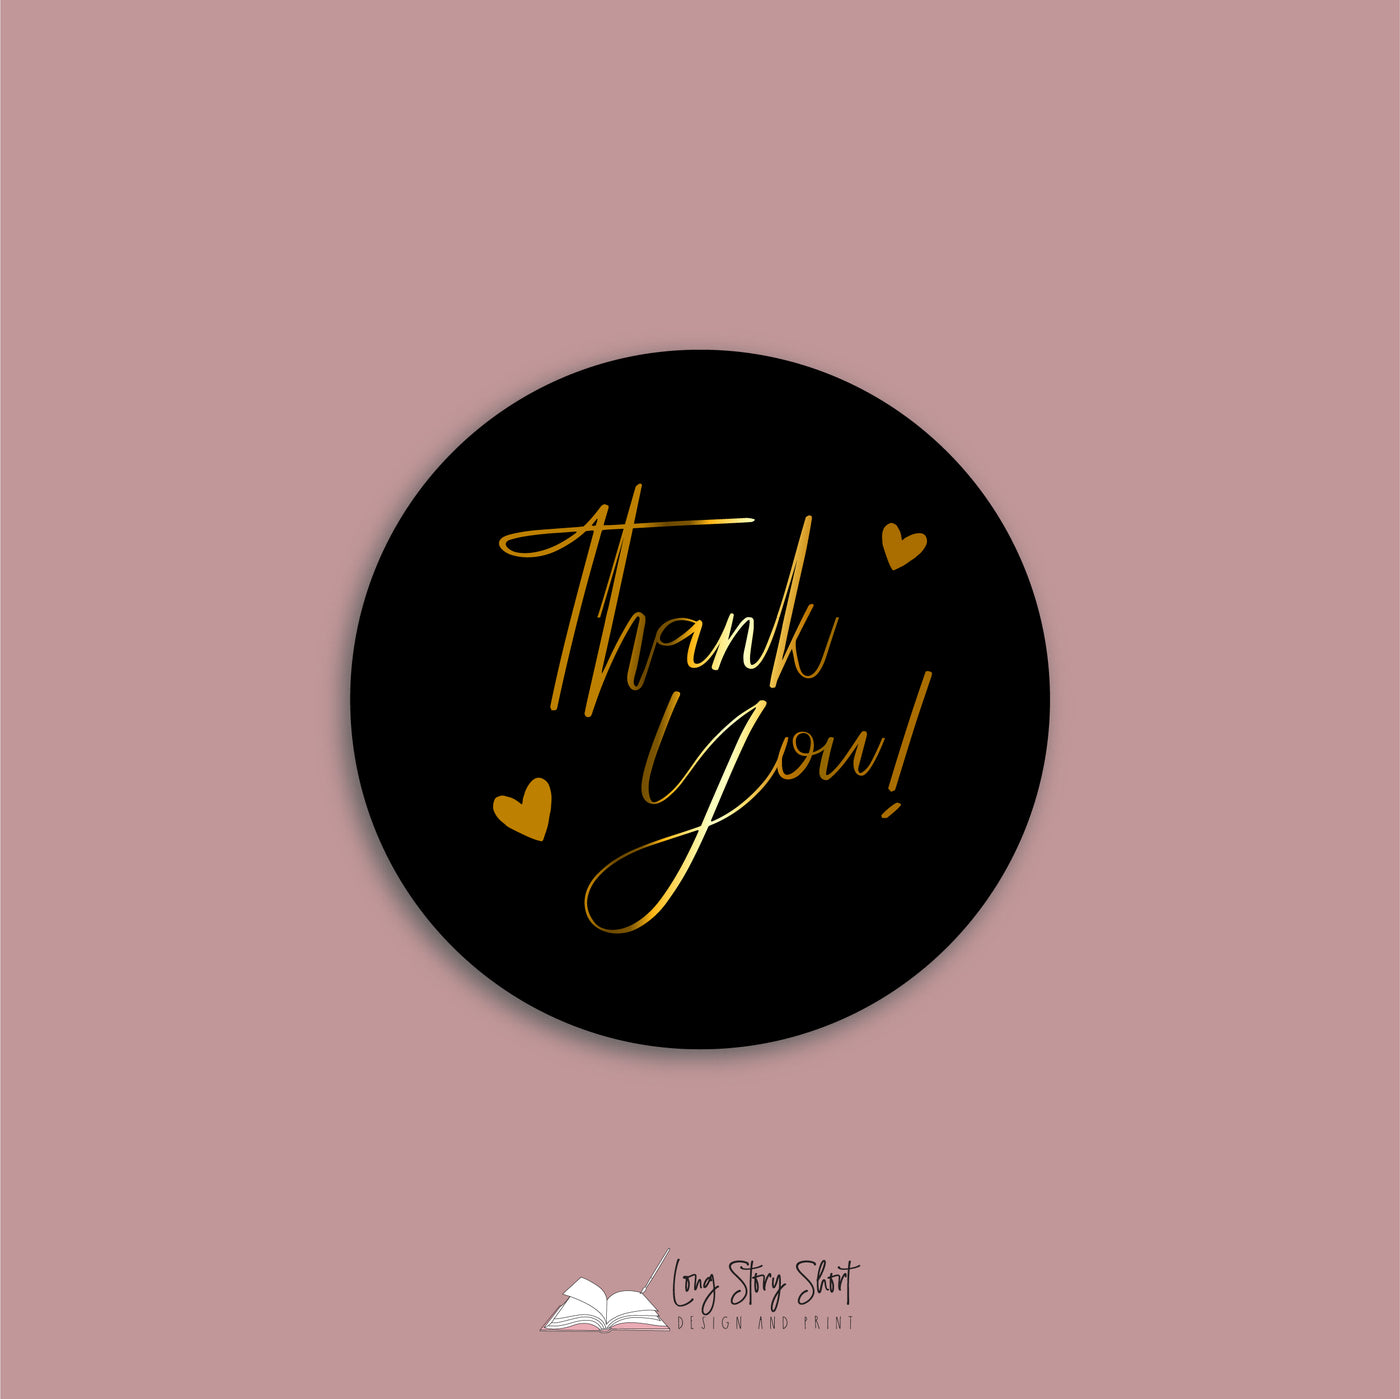 FOILED Thank you hearts Vinyl Label Pack